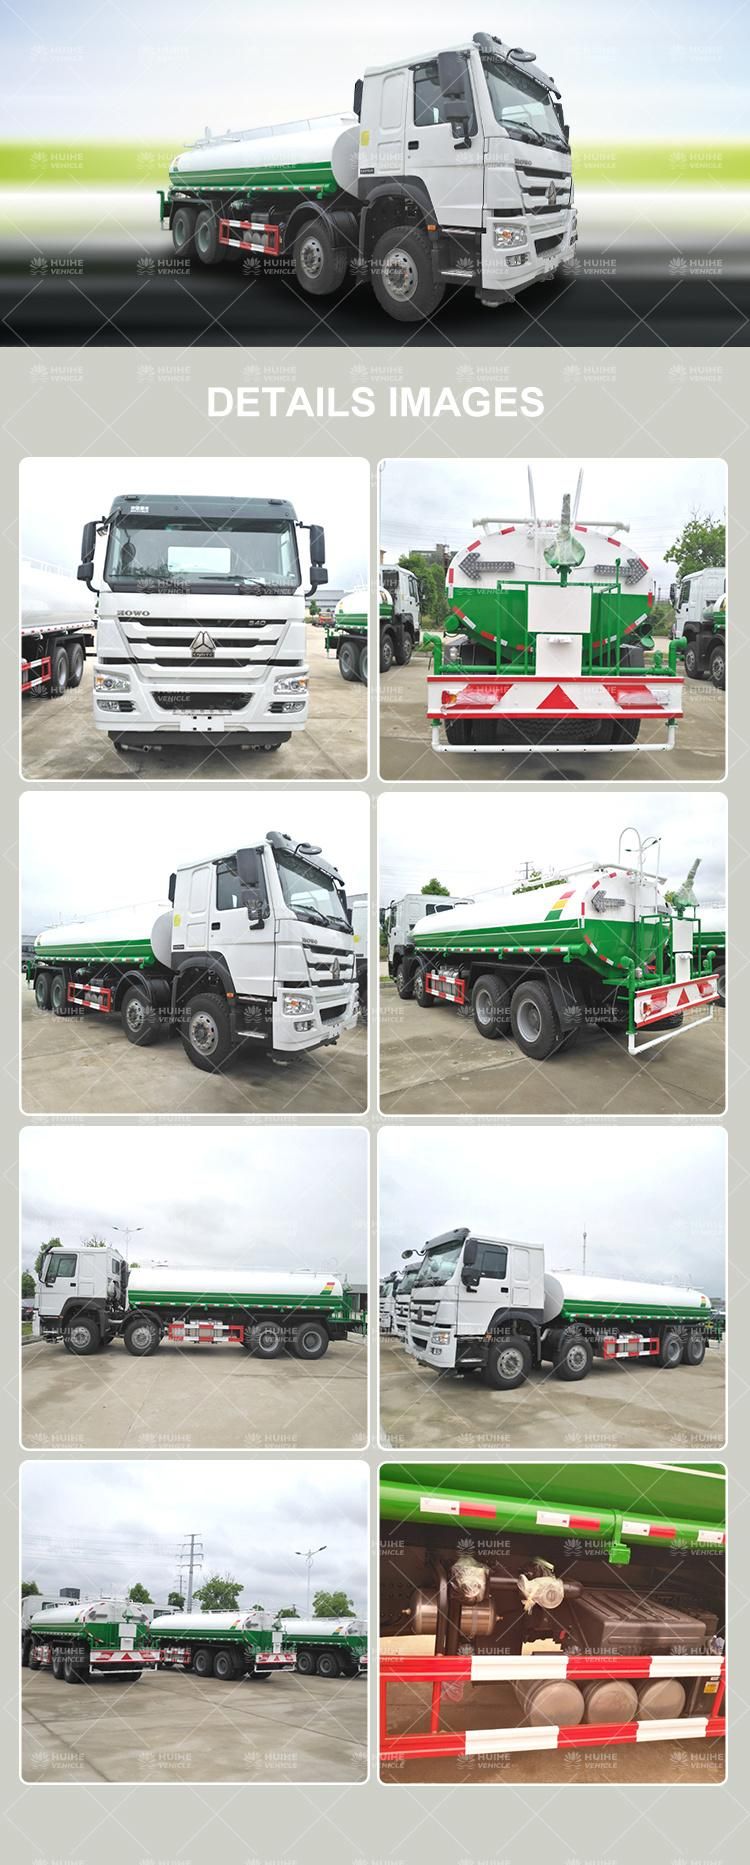 Hino-Truck Water Tanker Used Water Truck 6X4 Second Hand Water Tanker Truck Cheap Price Used Heavy Duty Water Trucks